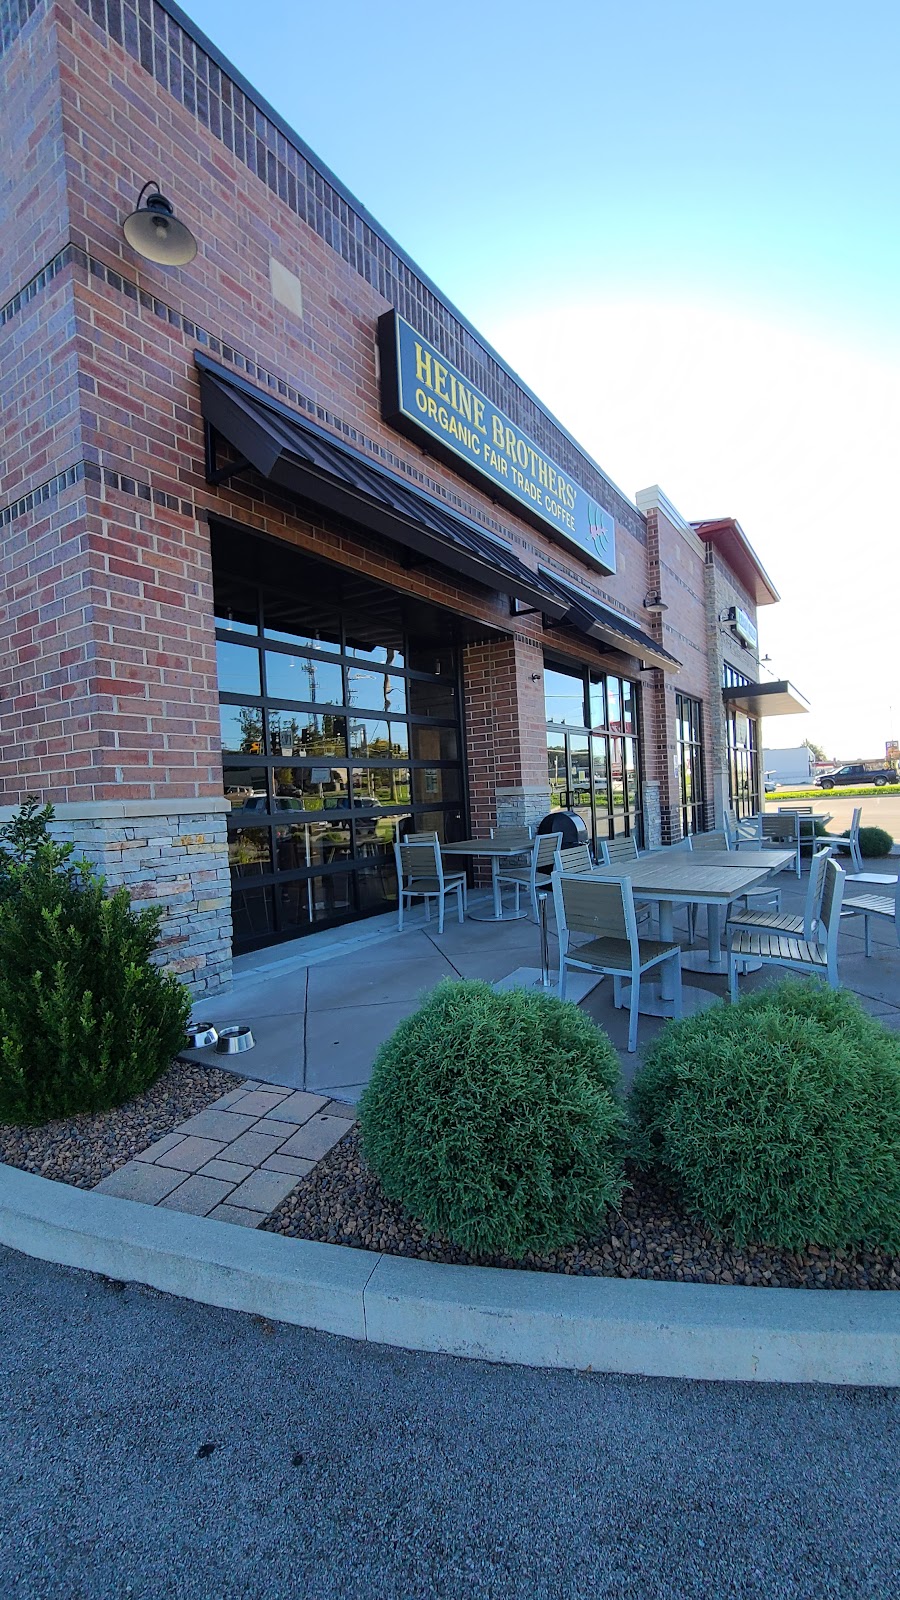 Heine Brothers Coffee - State Street | 414 W Daisy Ln, New Albany, IN 47150, USA | Phone: (812) 590-1732